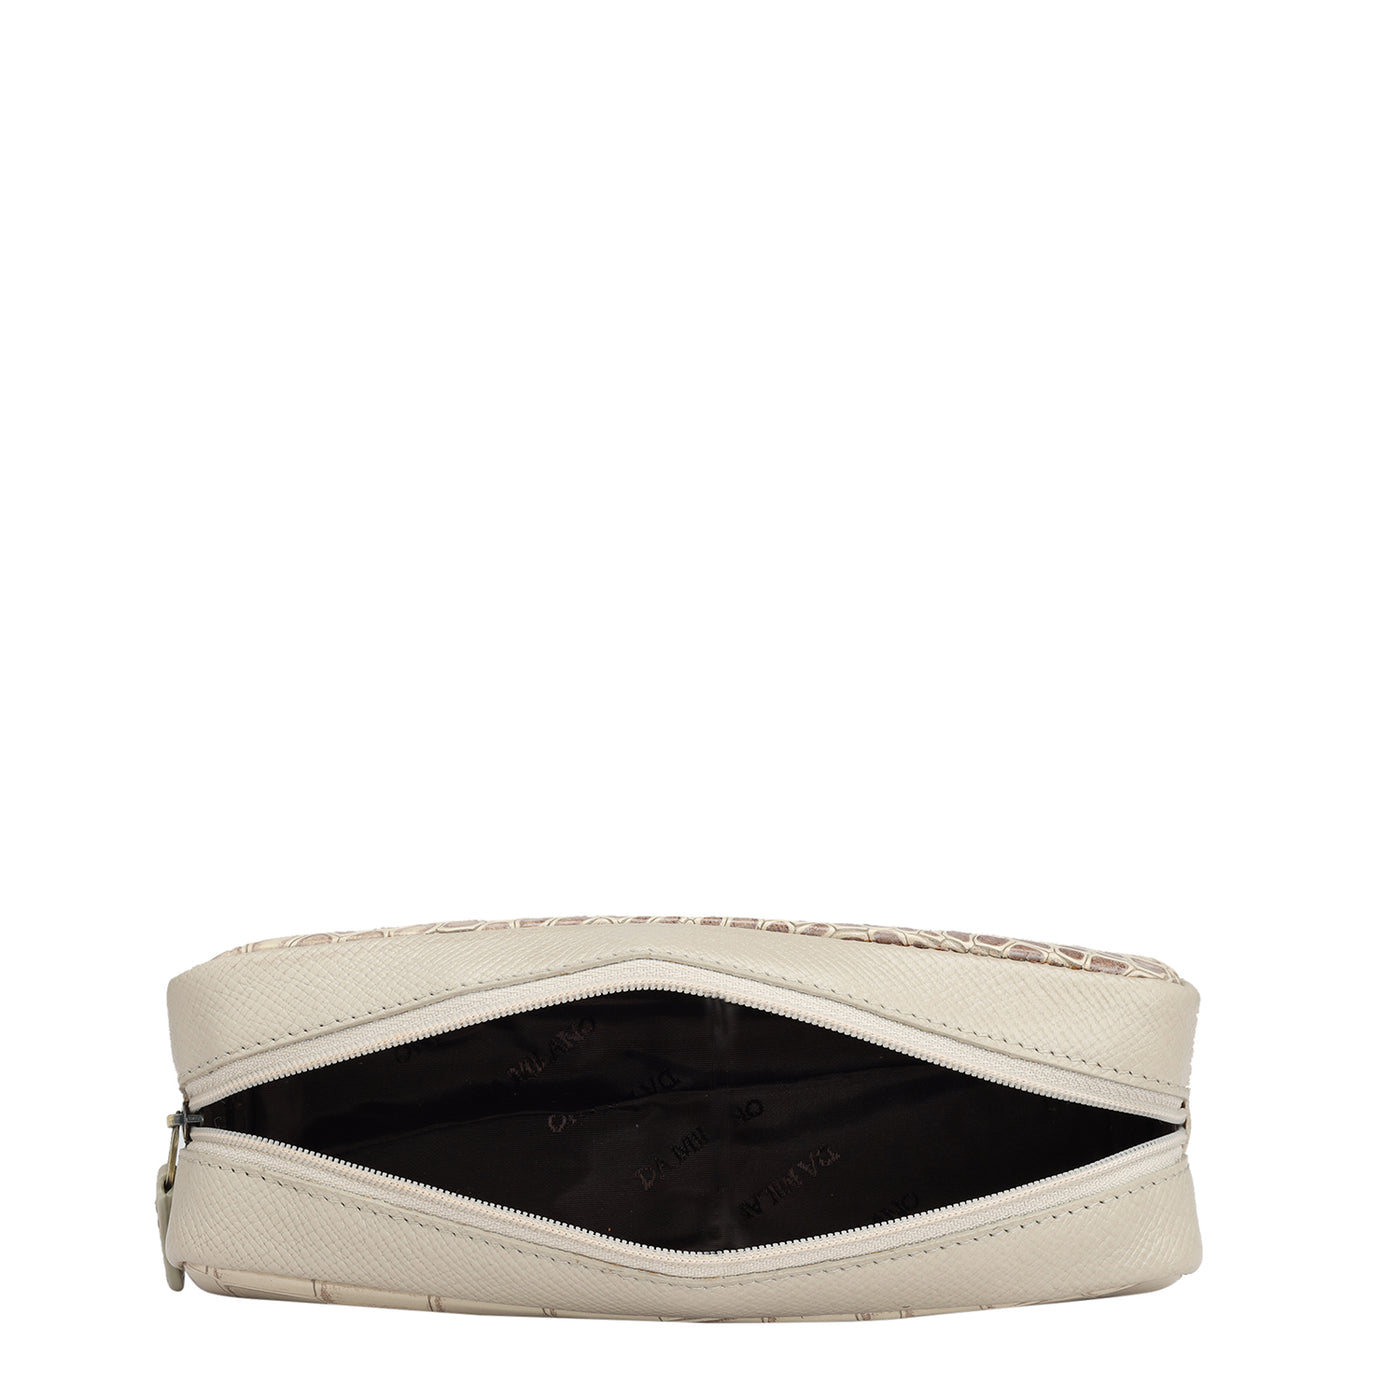 Croco Franzy Leather Multi Pouch - Frost